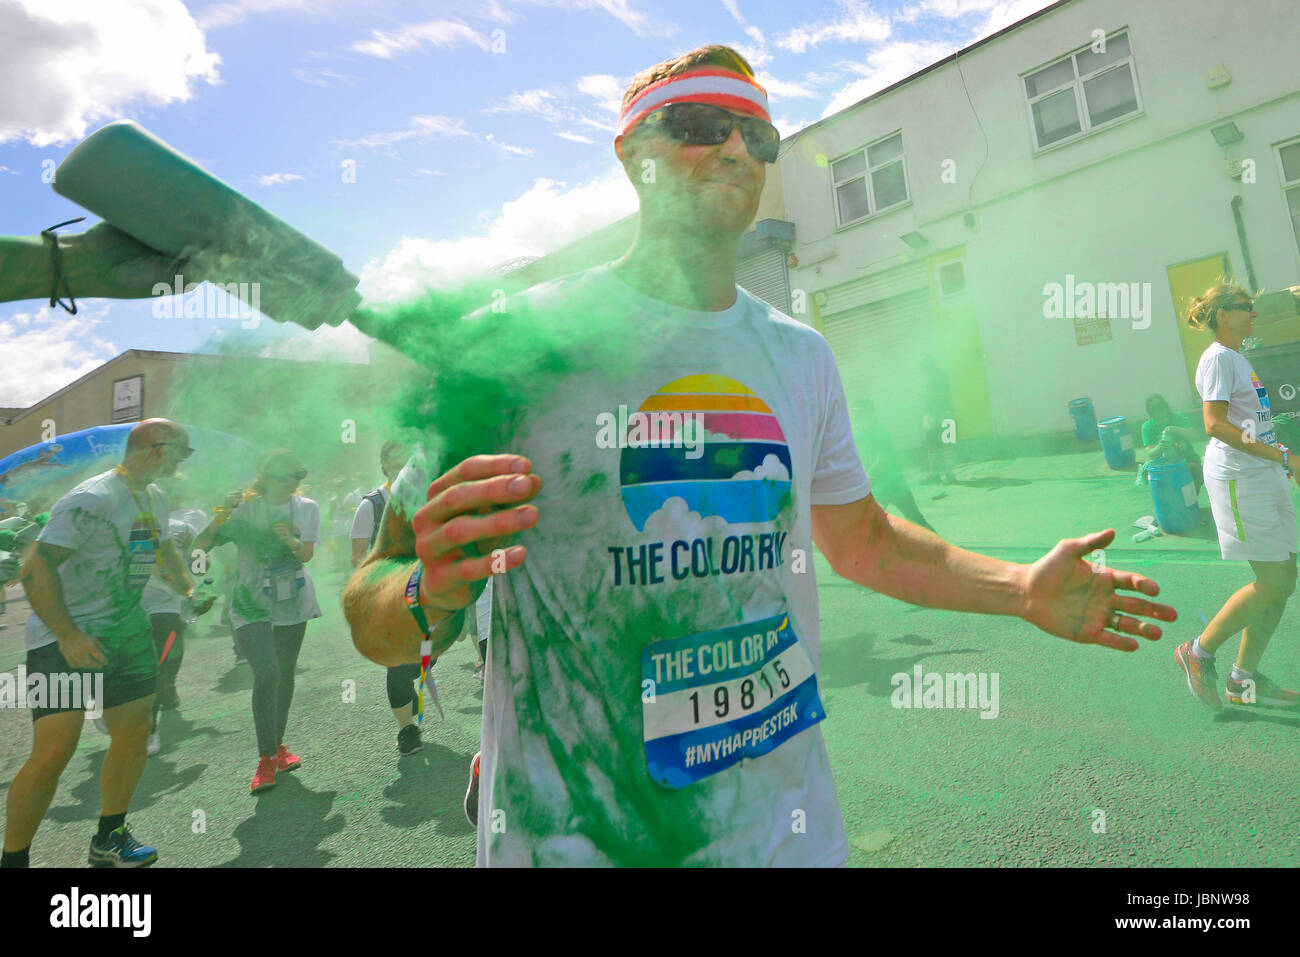 https://c8.alamy.com/comp/JBNW98/color-run-london-at-wembley-park-sprayed-showered-with-coloured-powder-JBNW98.jpg